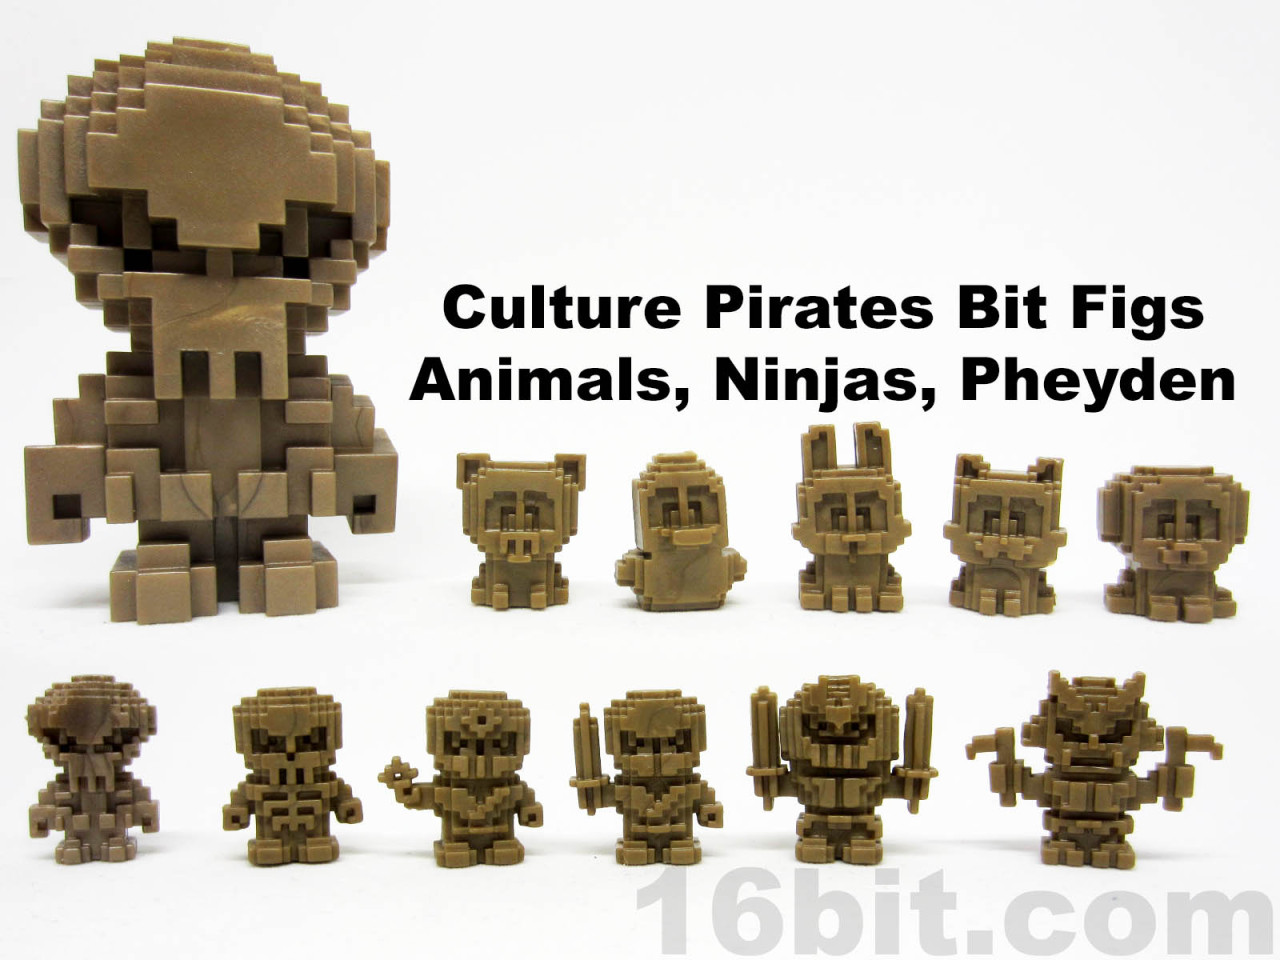 Reviews start next week - but these are new @bitfigs from Culture Pirates, SSM Vending, Onell Design, and presumably someone else. I don’t know who.
The idea is that they’re (mostly) vending machine figures, so keep an eye open for these in other...